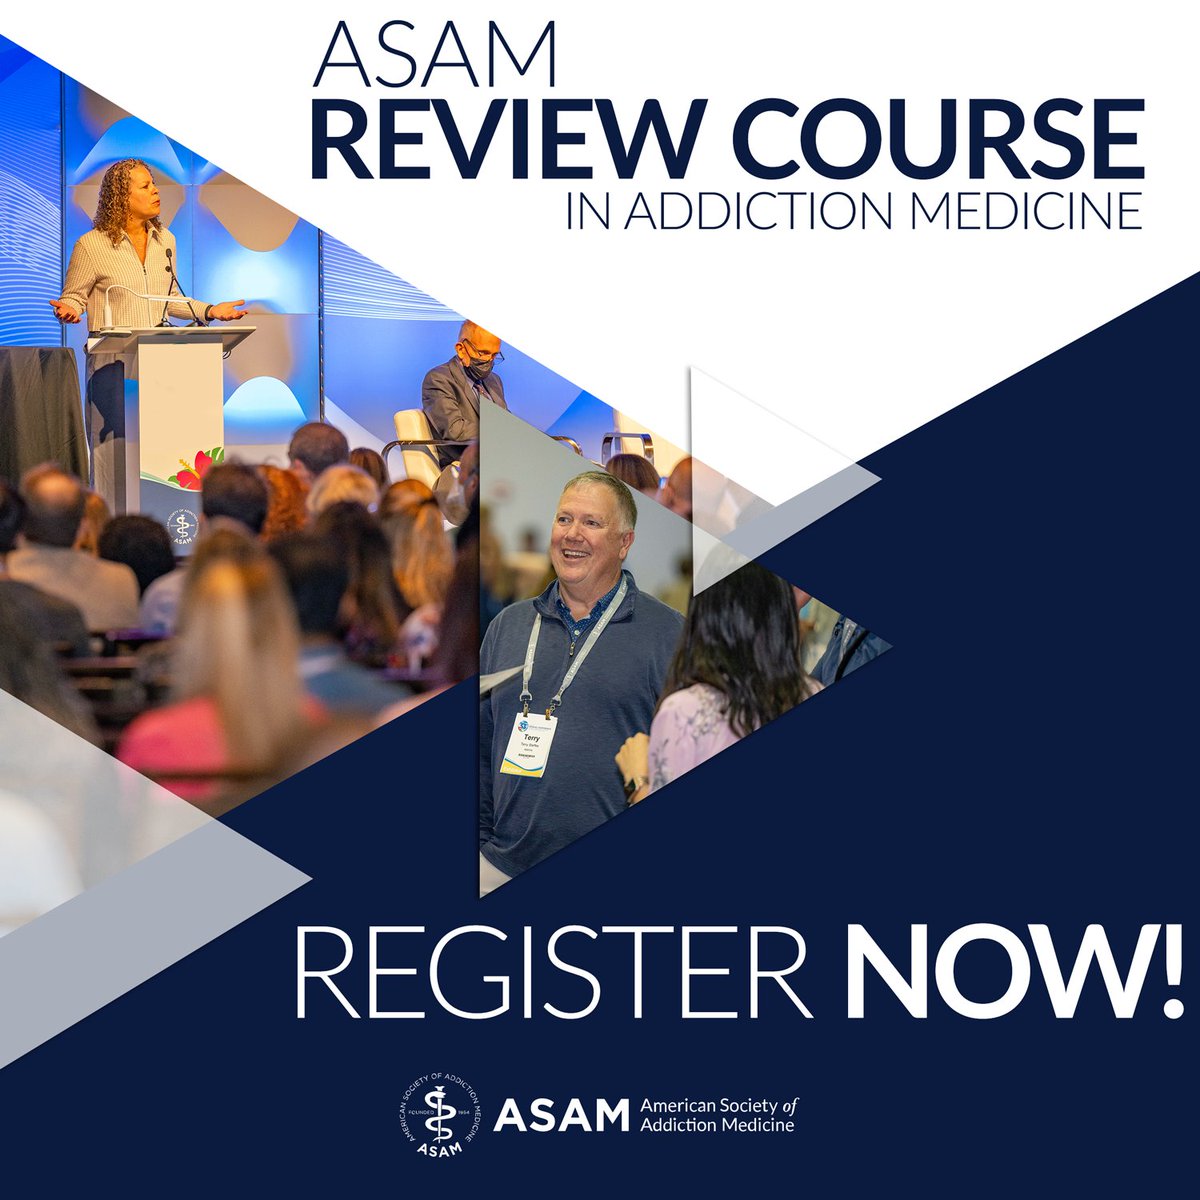 The ASAM Review Course provides you with an up-to-date review of the core content of the addiction medicine board certification exam and recent developments in addiction science and practice. Register now ➡️ reviewcourse.asam.org #AddictionMedicine #ASAM